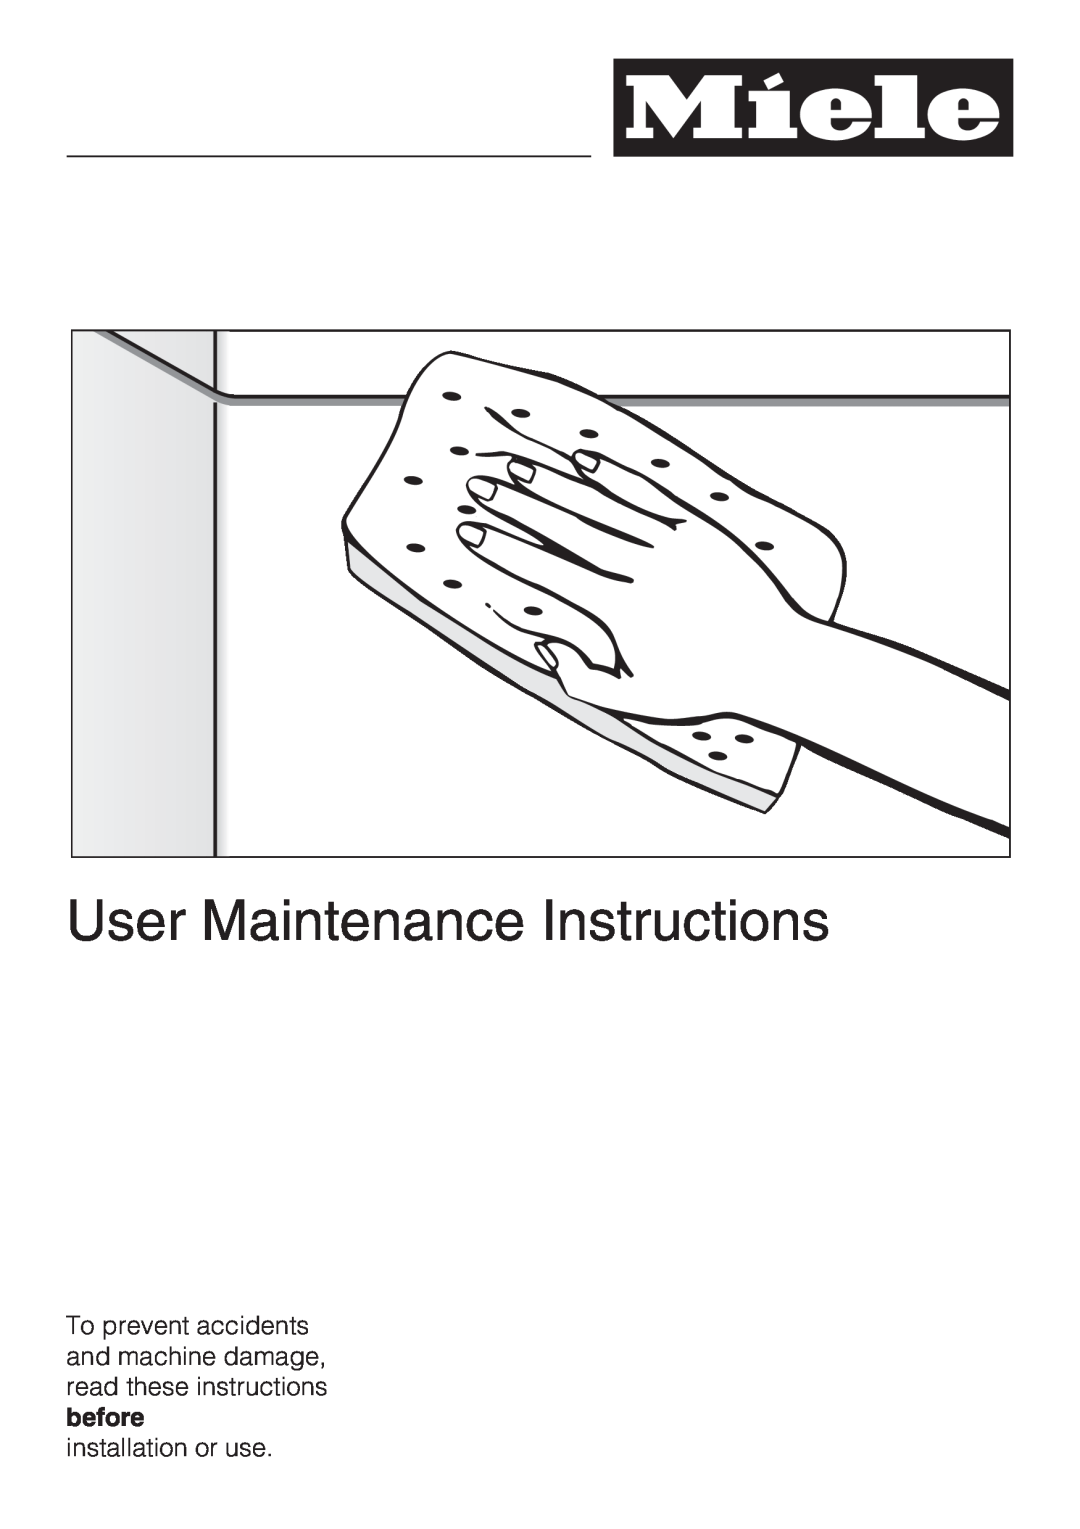 Miele G 4220, G 4225 manual User Maintenance Instructions, installation or use 